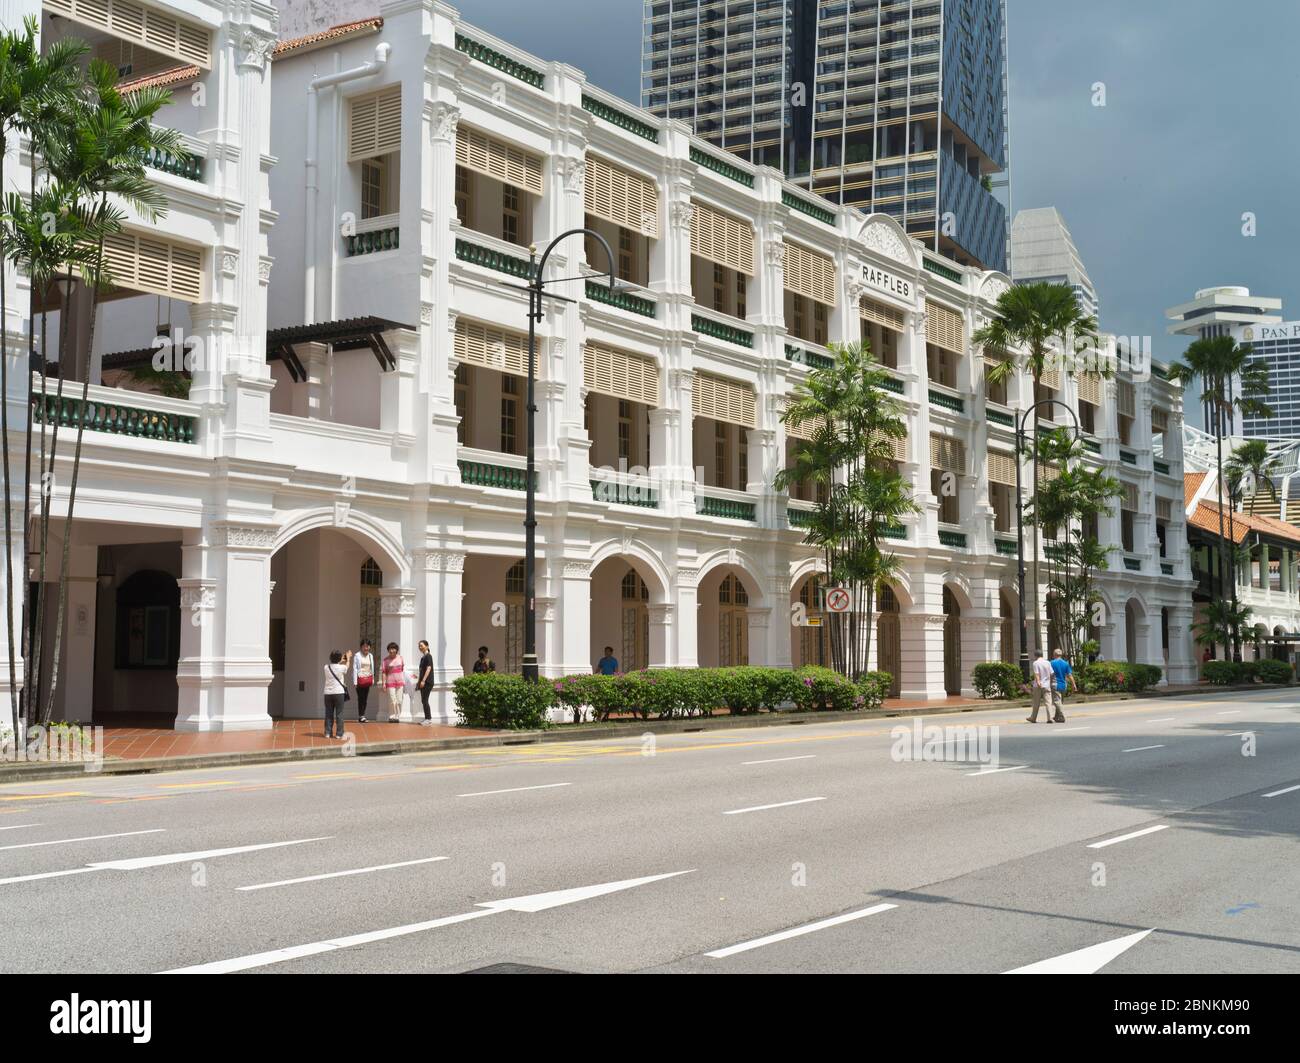 dh Traditional Colonial building RAFFLES HOTEL SINGAPORE Exterior people in street entrance asia Stock Photo